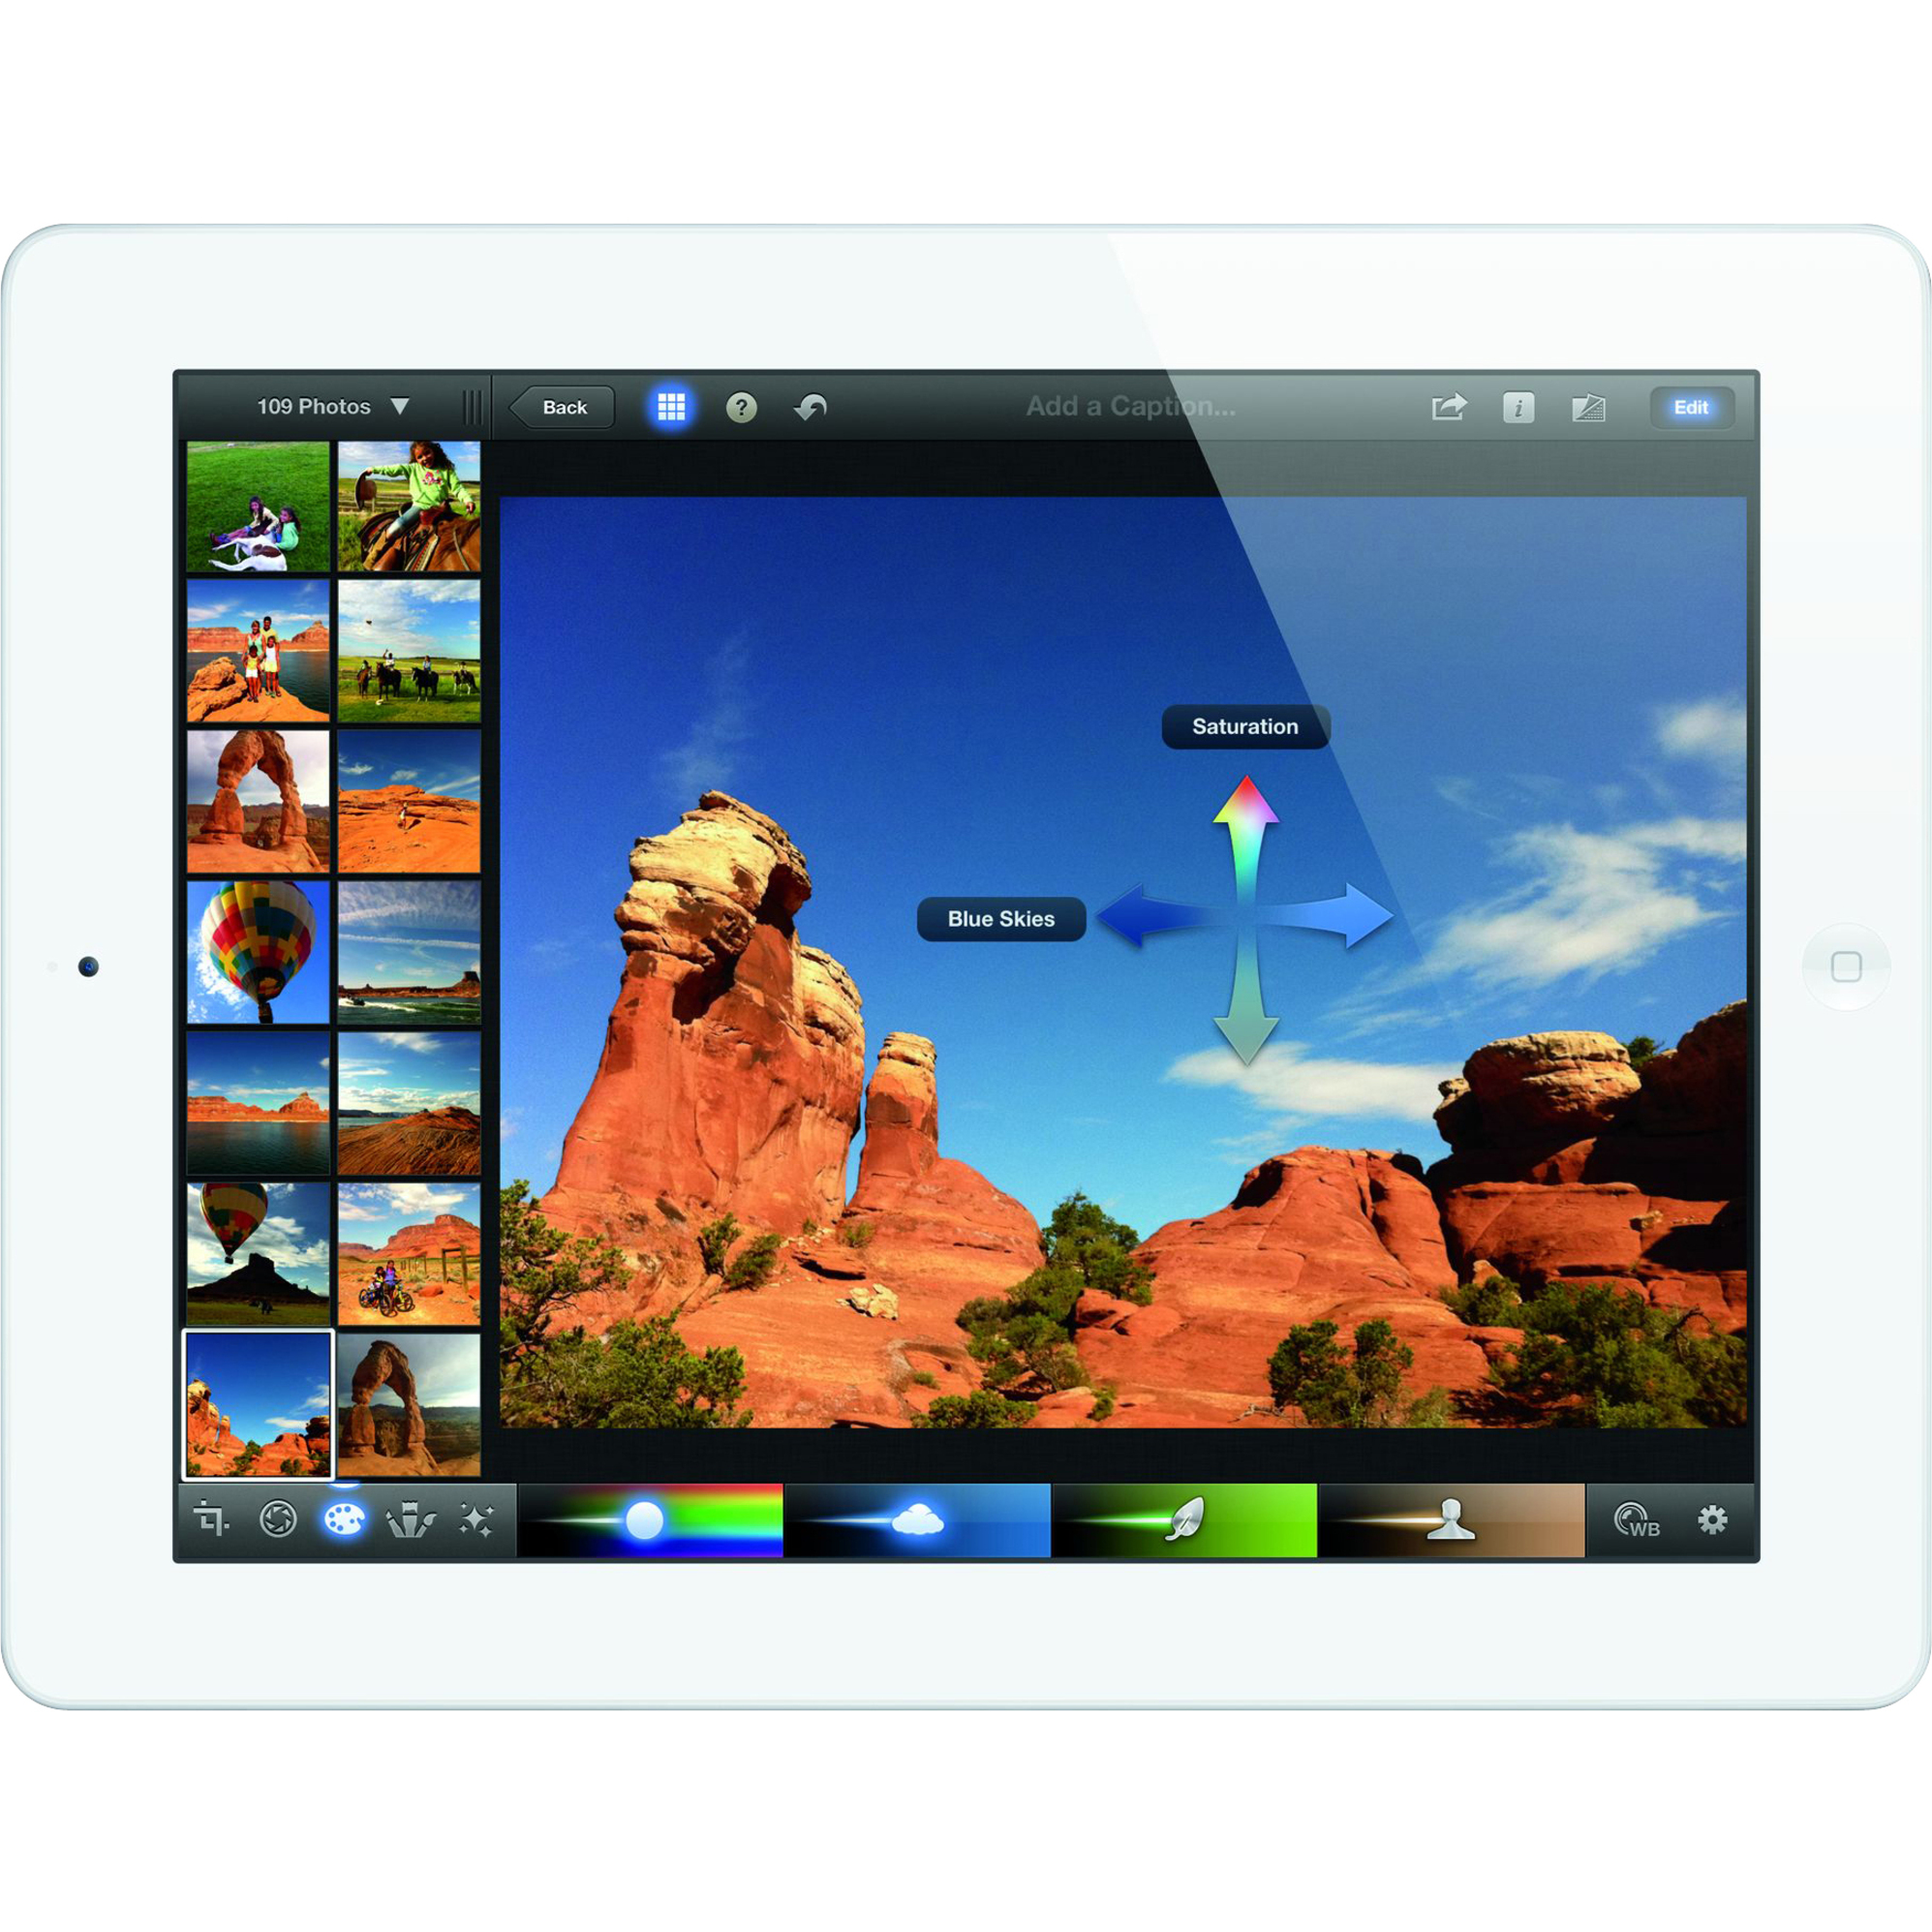 Apple iPad (3rd Generation) MD369LL/A Tablet, 9.7" QXGA, Cortex A9 Dual-core (2 Core) 1 GHz, 512 MB RAM, 16 GB Storage, iOS 5, 4G, White - image 1 of 5